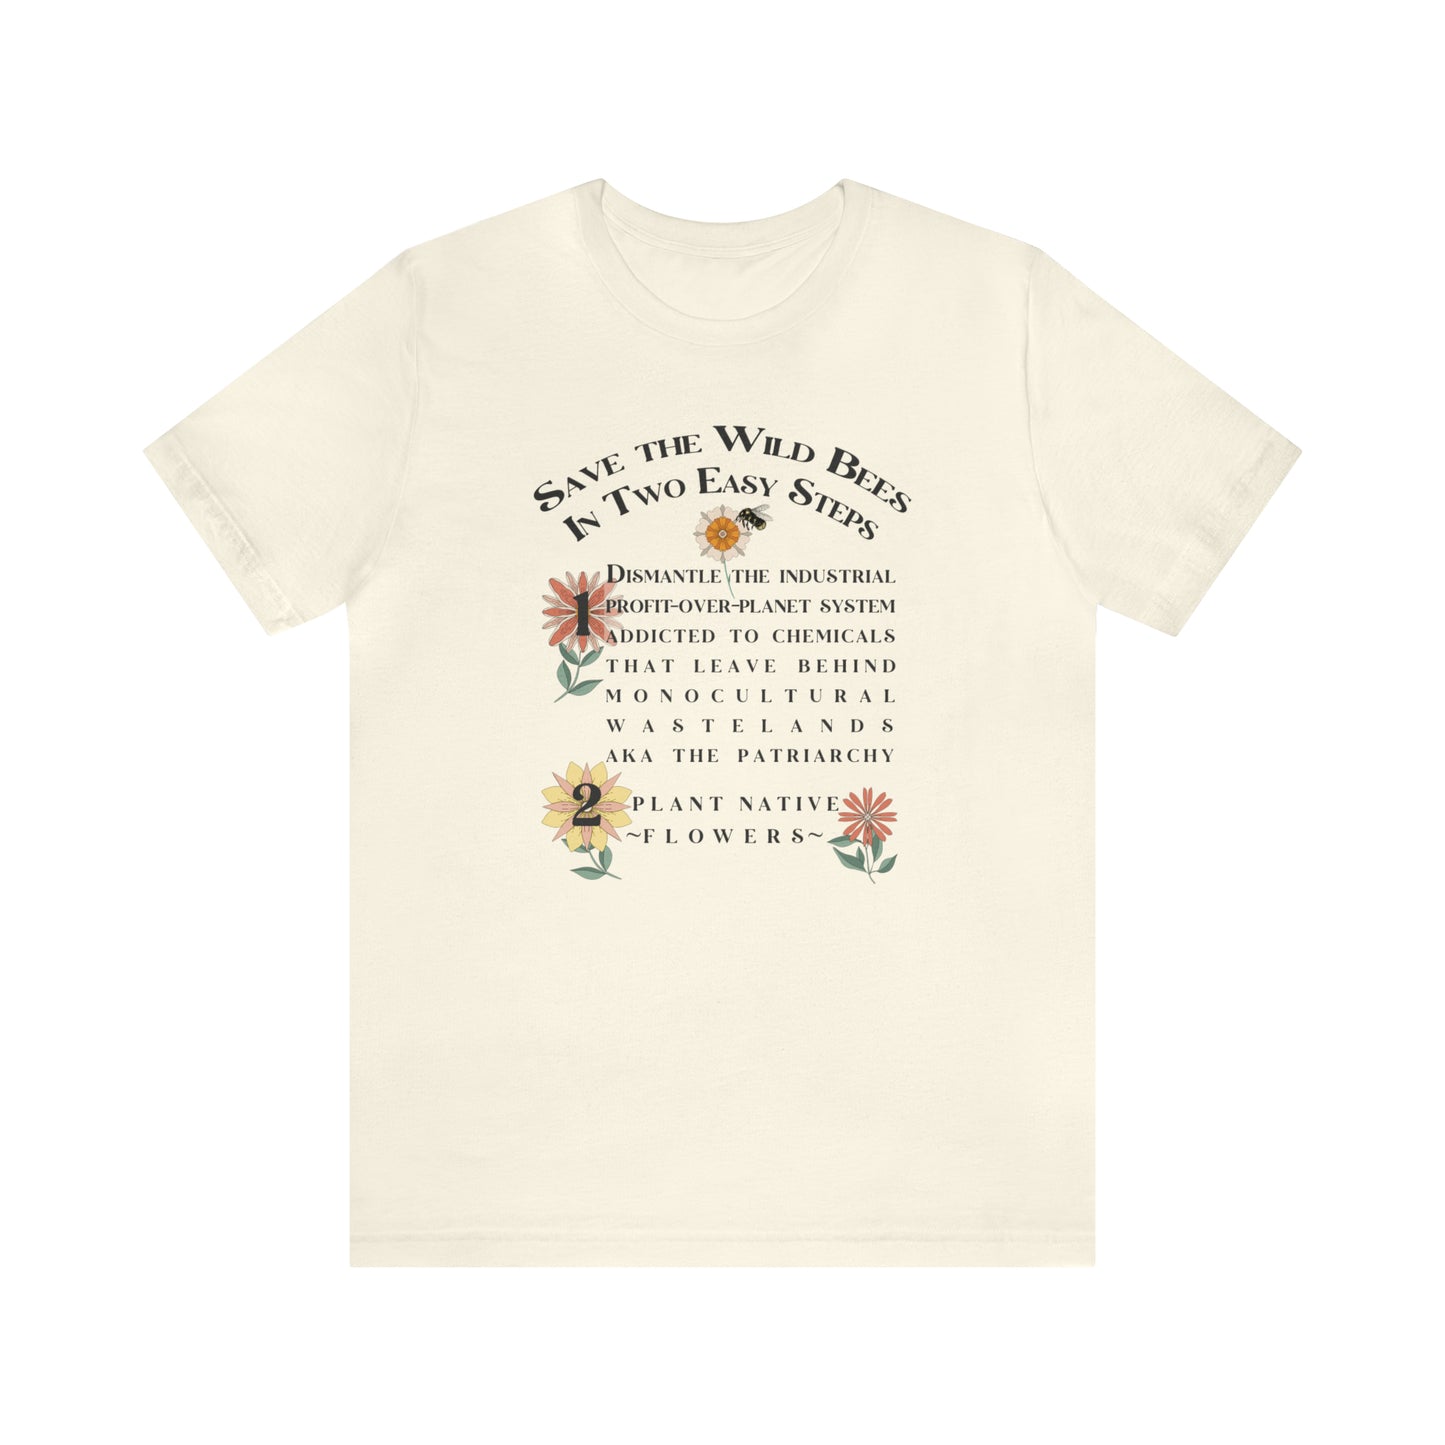 Save Wild Bees tee, Nature t-shirt for conservation, Environmental science gift for ecological teachers, gardeners, In 2 Easy Steps!